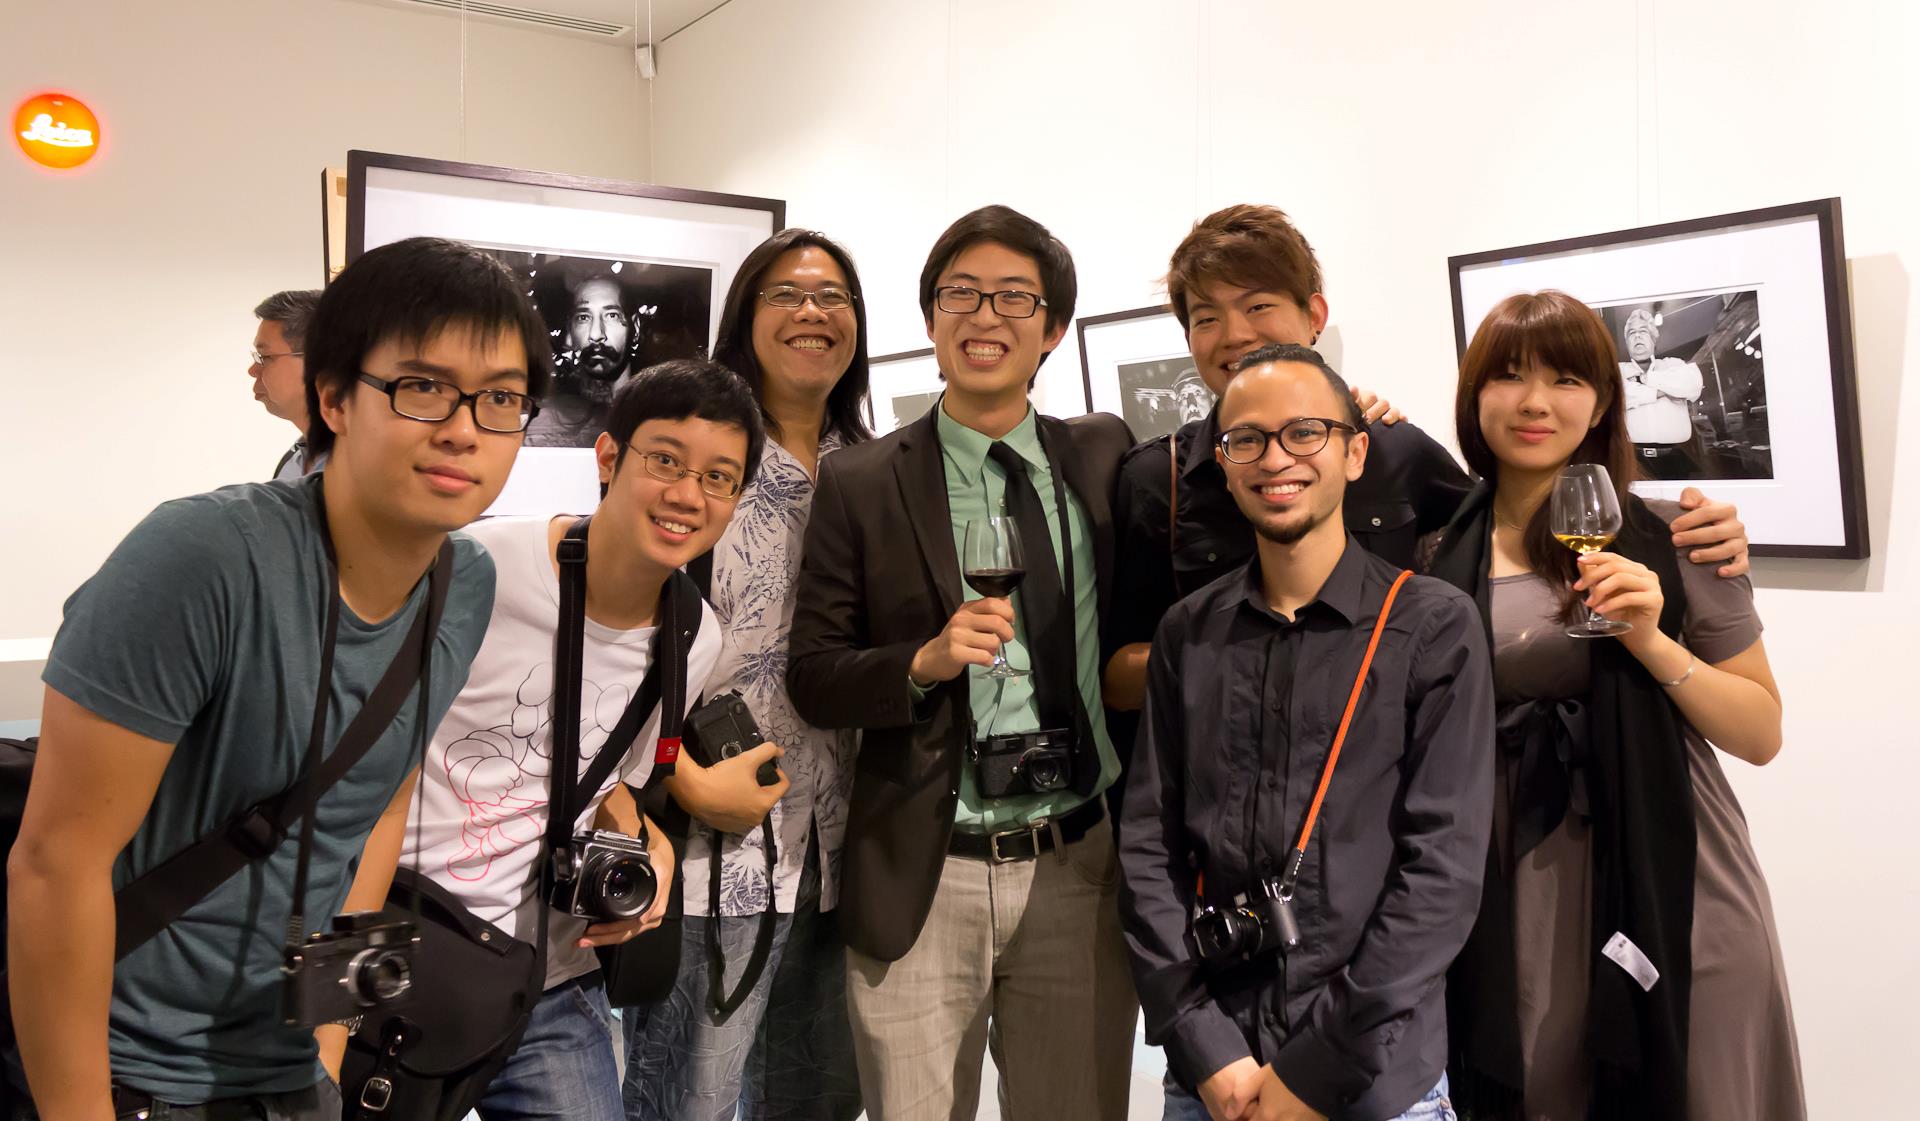 Snapshots from my Singapore Street Photography Workshop and “Proximity” Exhibition